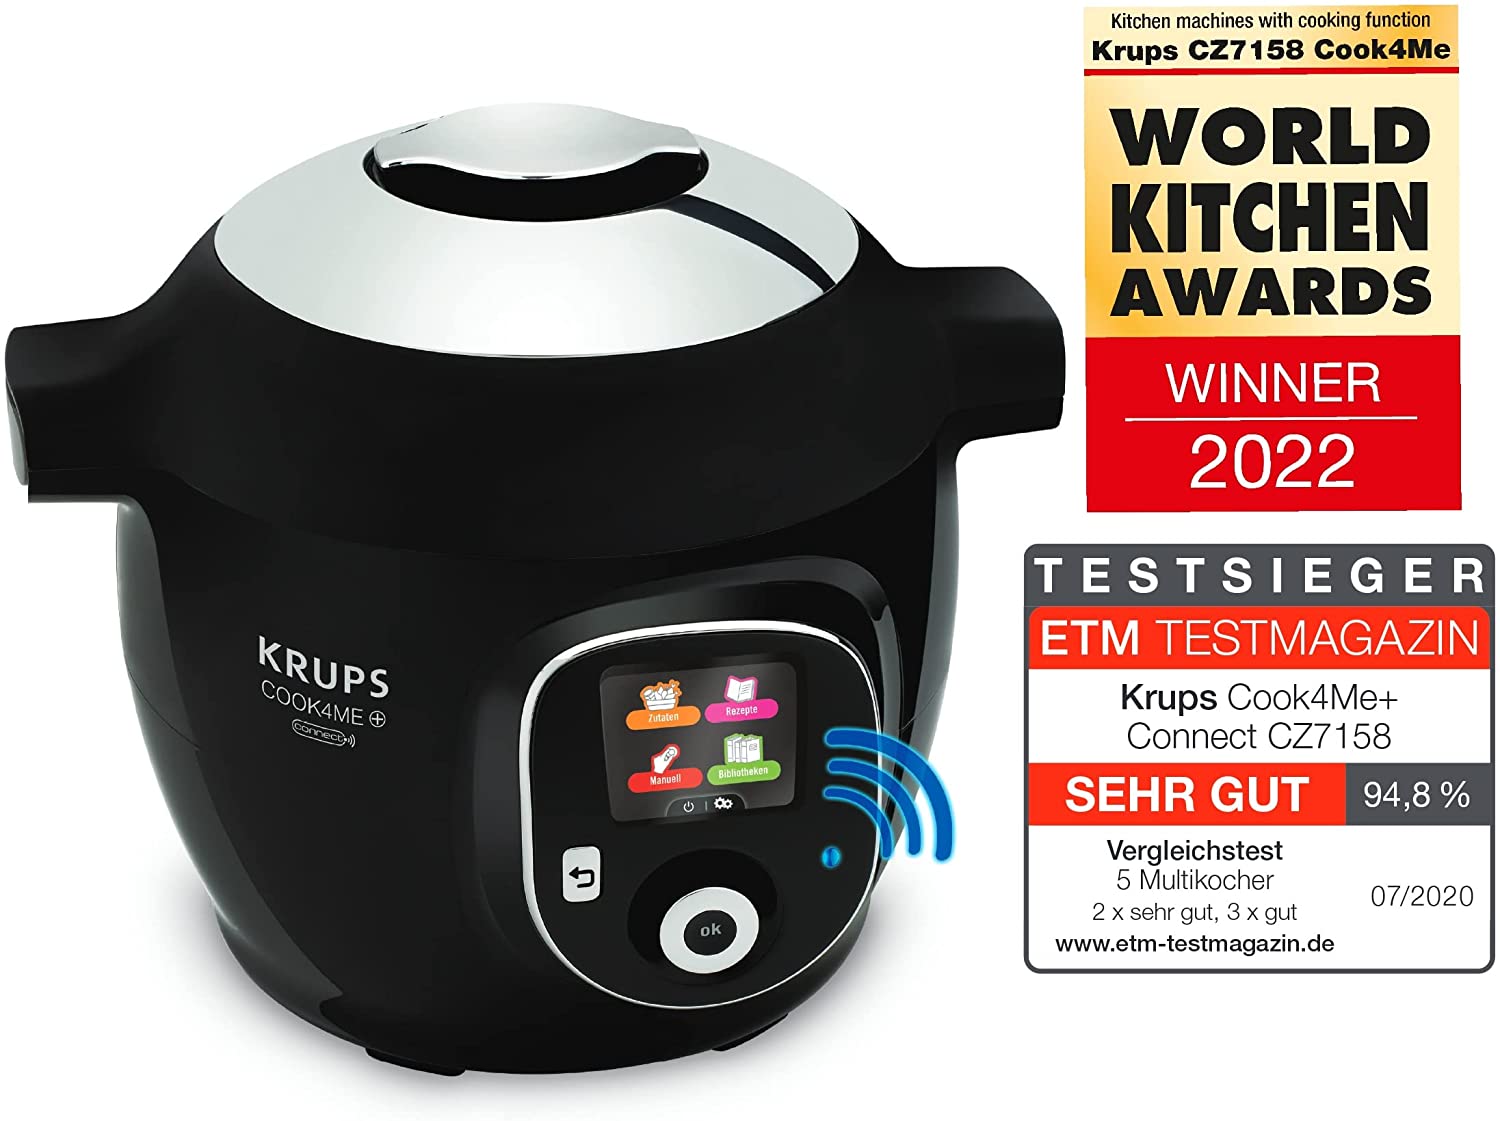 Krups CZ7158 Cook4Me + Connect multi-cooker (1600 watts, electric pressure cooker, incl. Free app, Bluetooth control, 4 liter capacity) black / gray